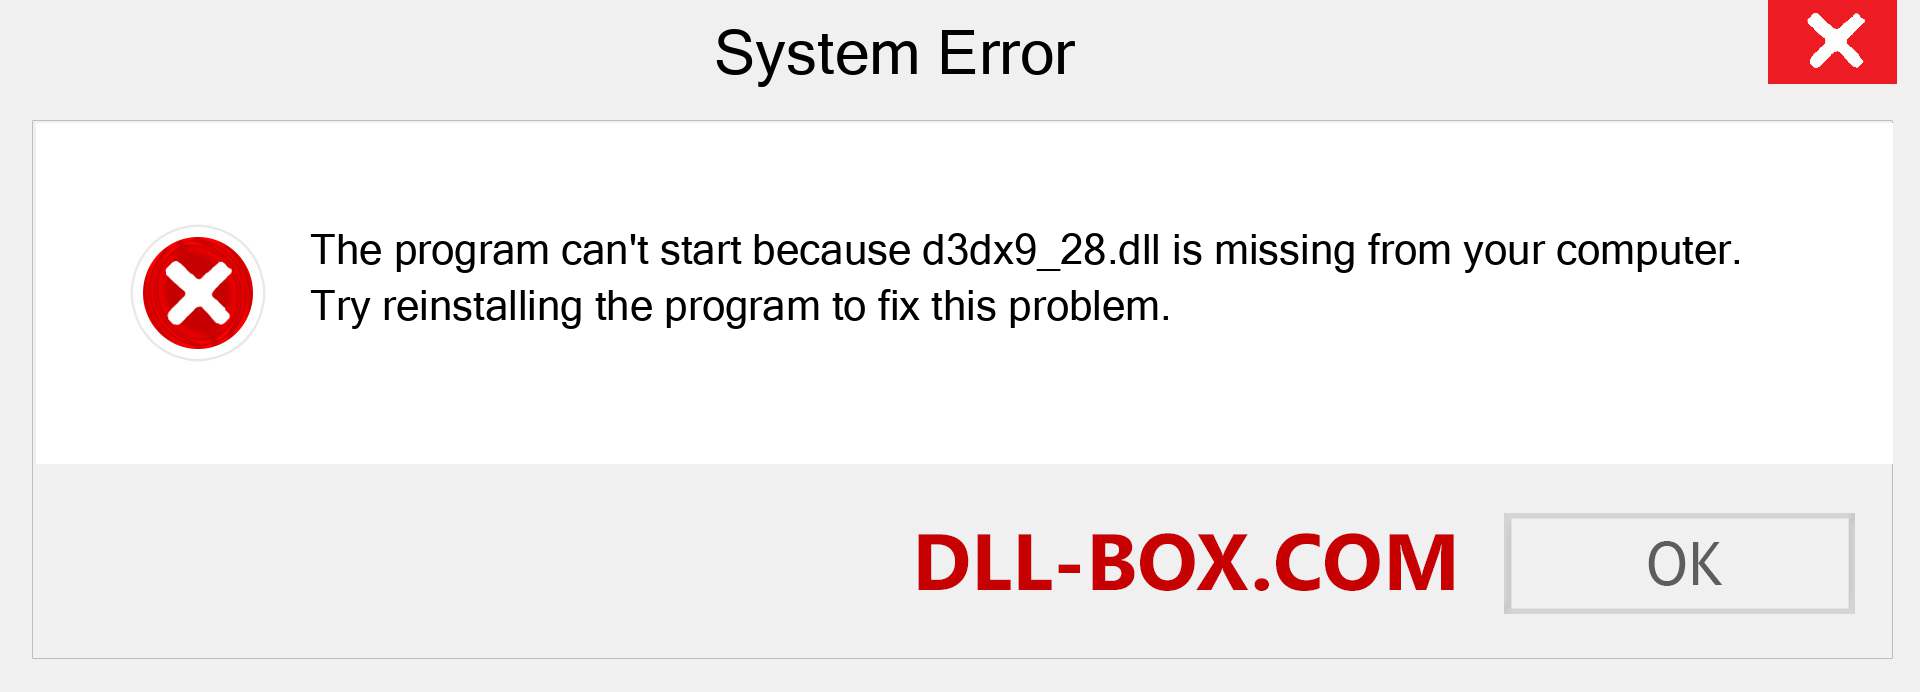  d3dx9_28.dll file is missing?. Download for Windows 7, 8, 10 - Fix  d3dx9_28 dll Missing Error on Windows, photos, images